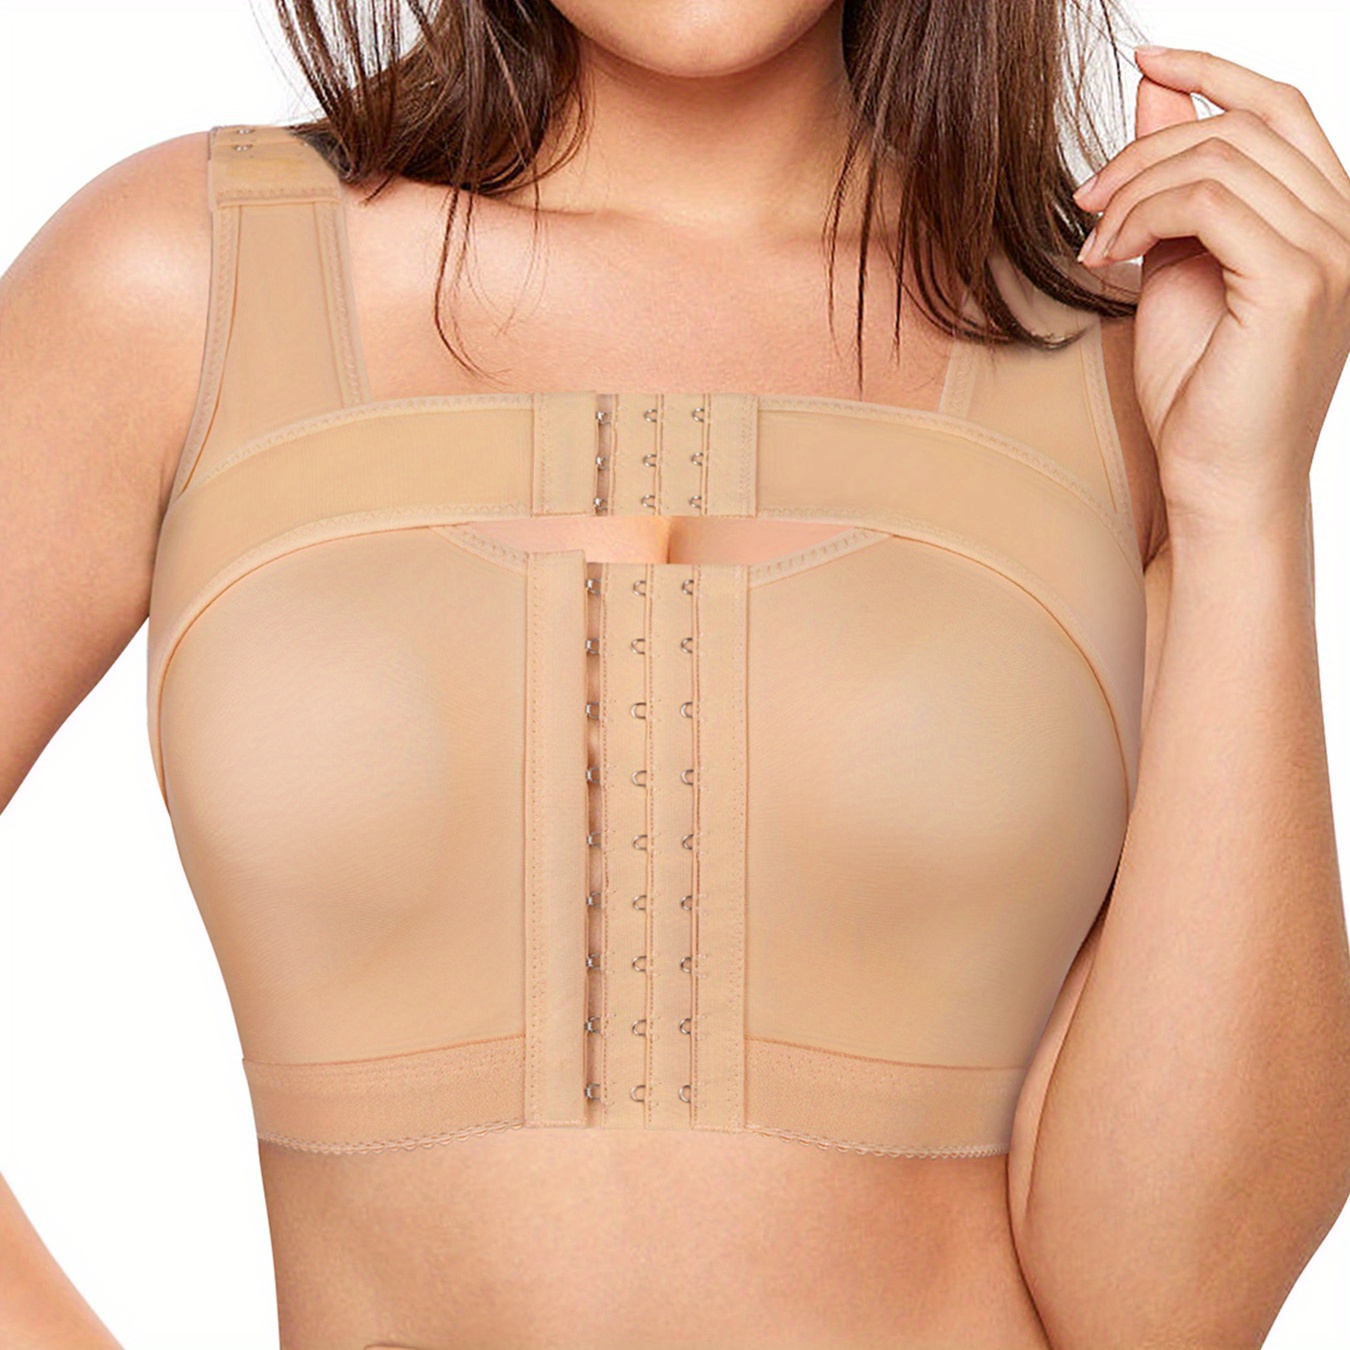  Womens Front Closure Bras Posture Full Coverage